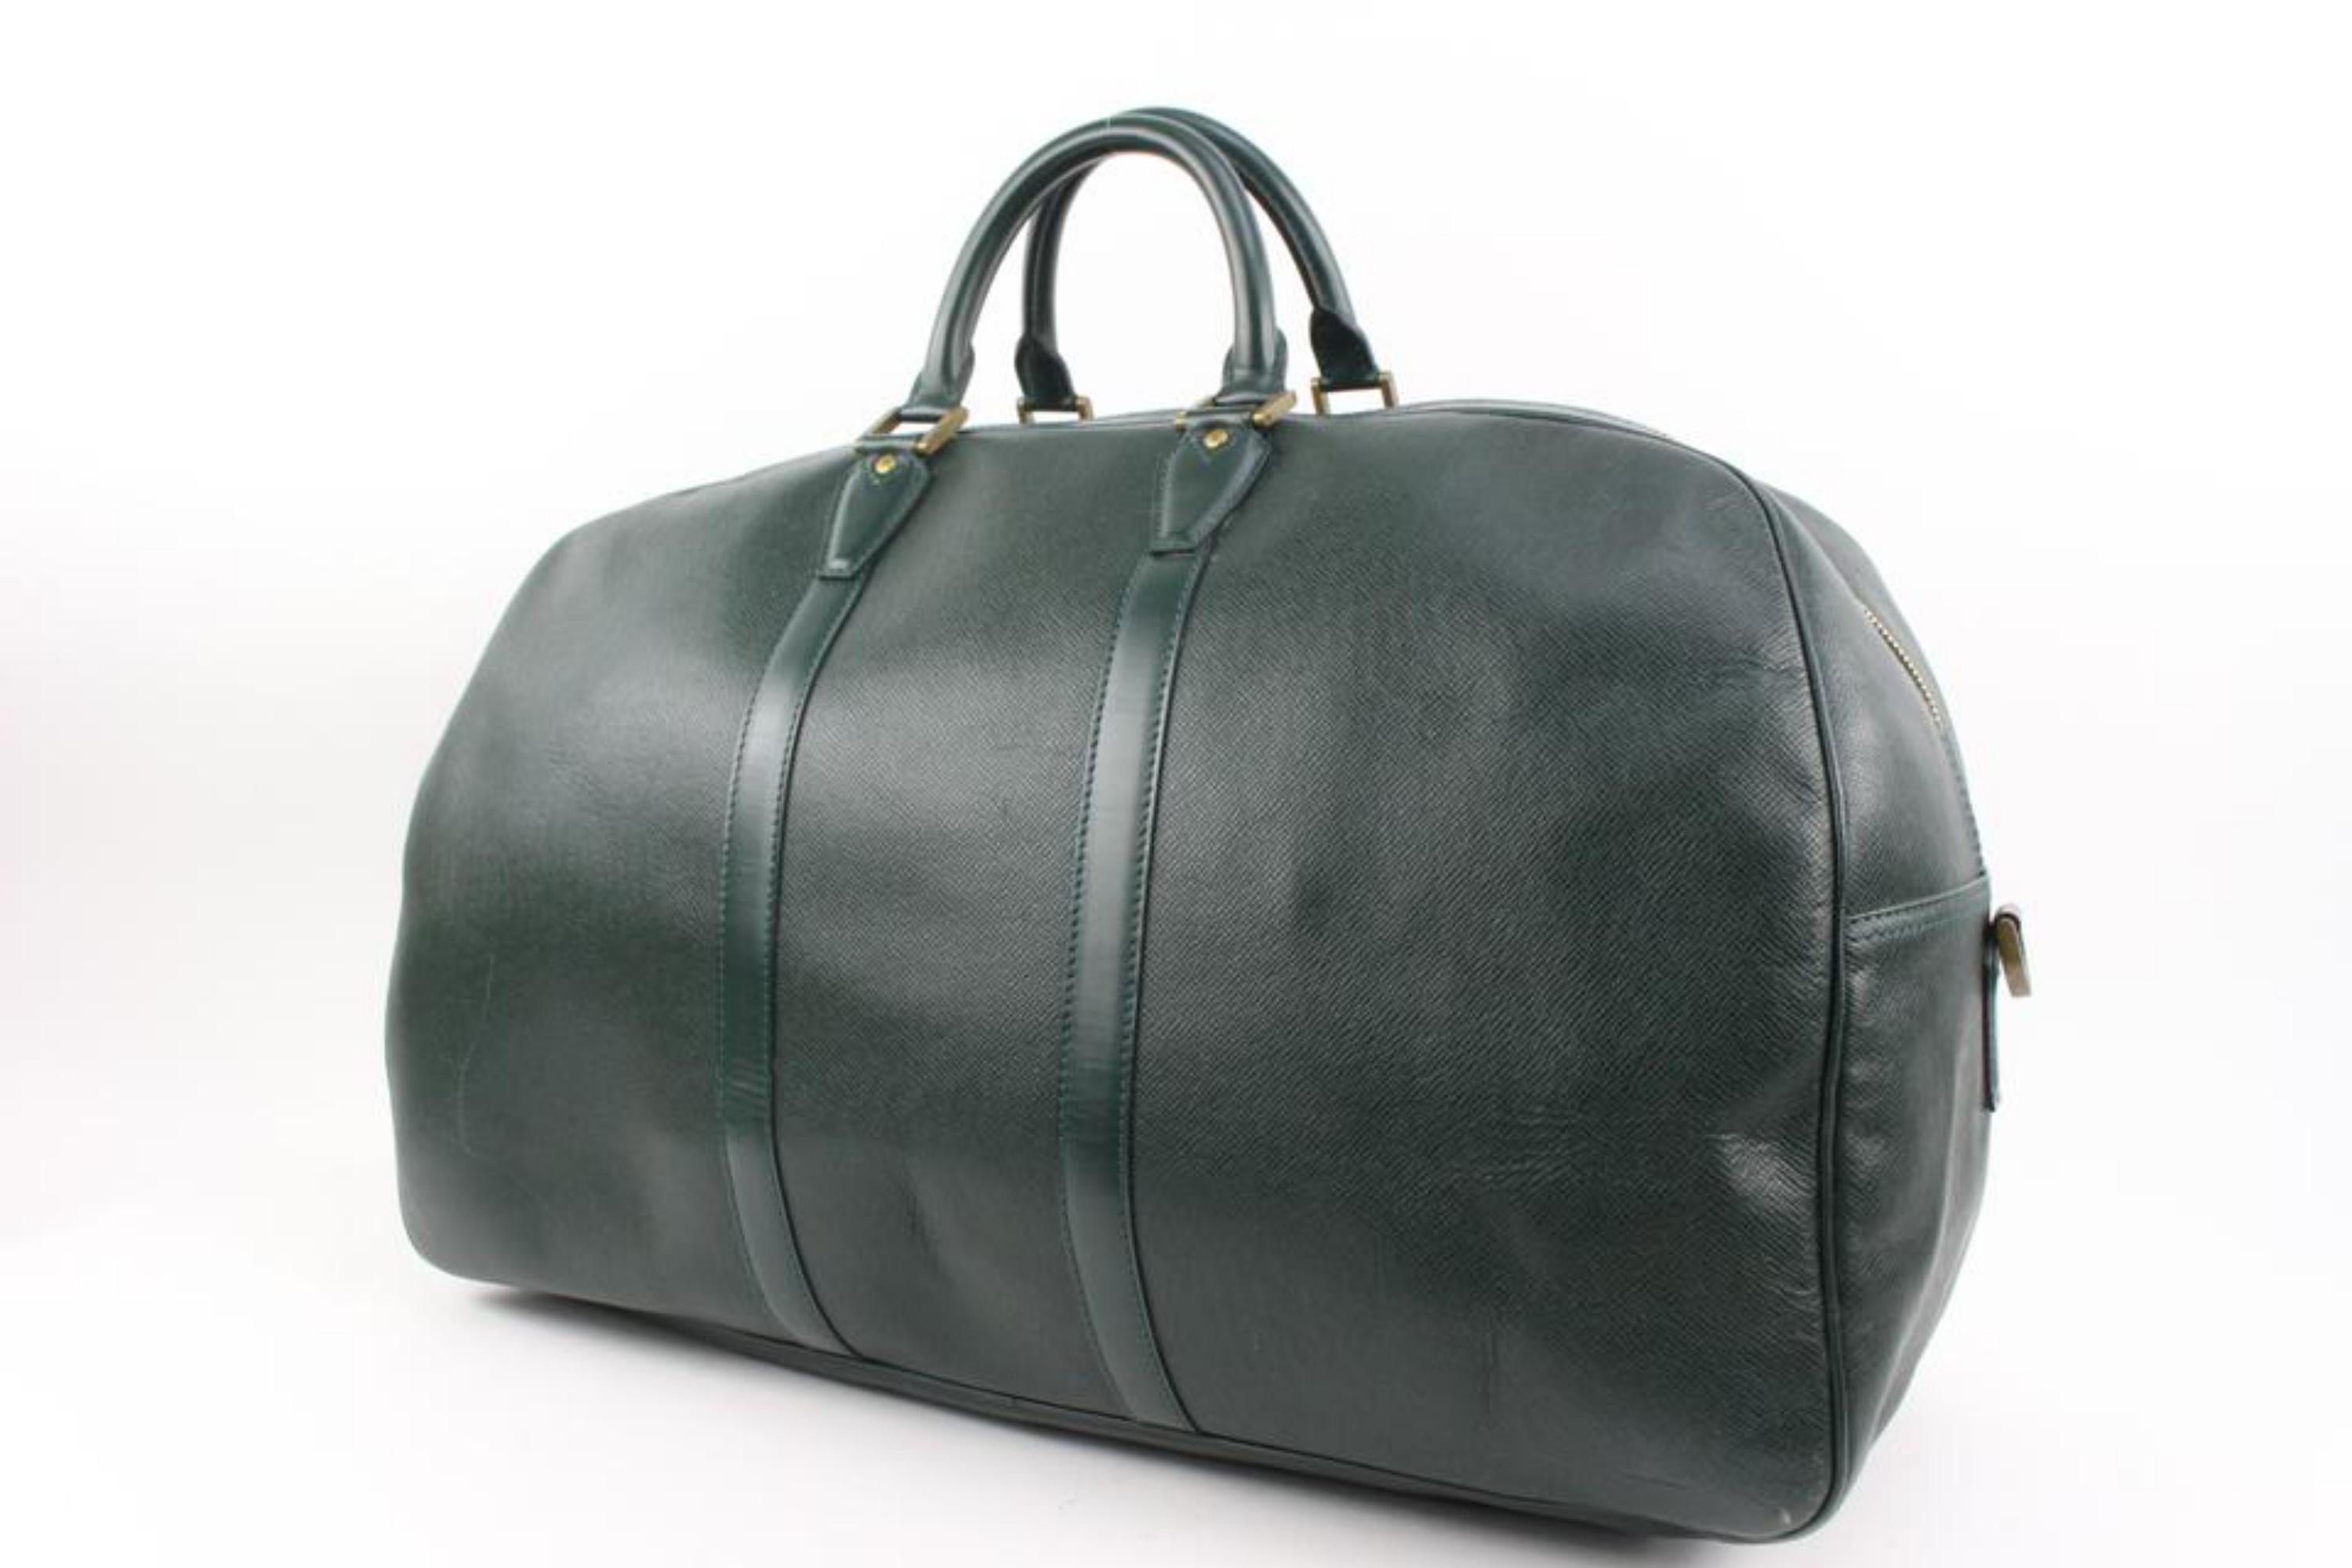 Louis Vuitton Green Taiga Leather Kendall GM Duffle Bag Keepall 19lv223s
Made In: France
Measurements: Length:  21